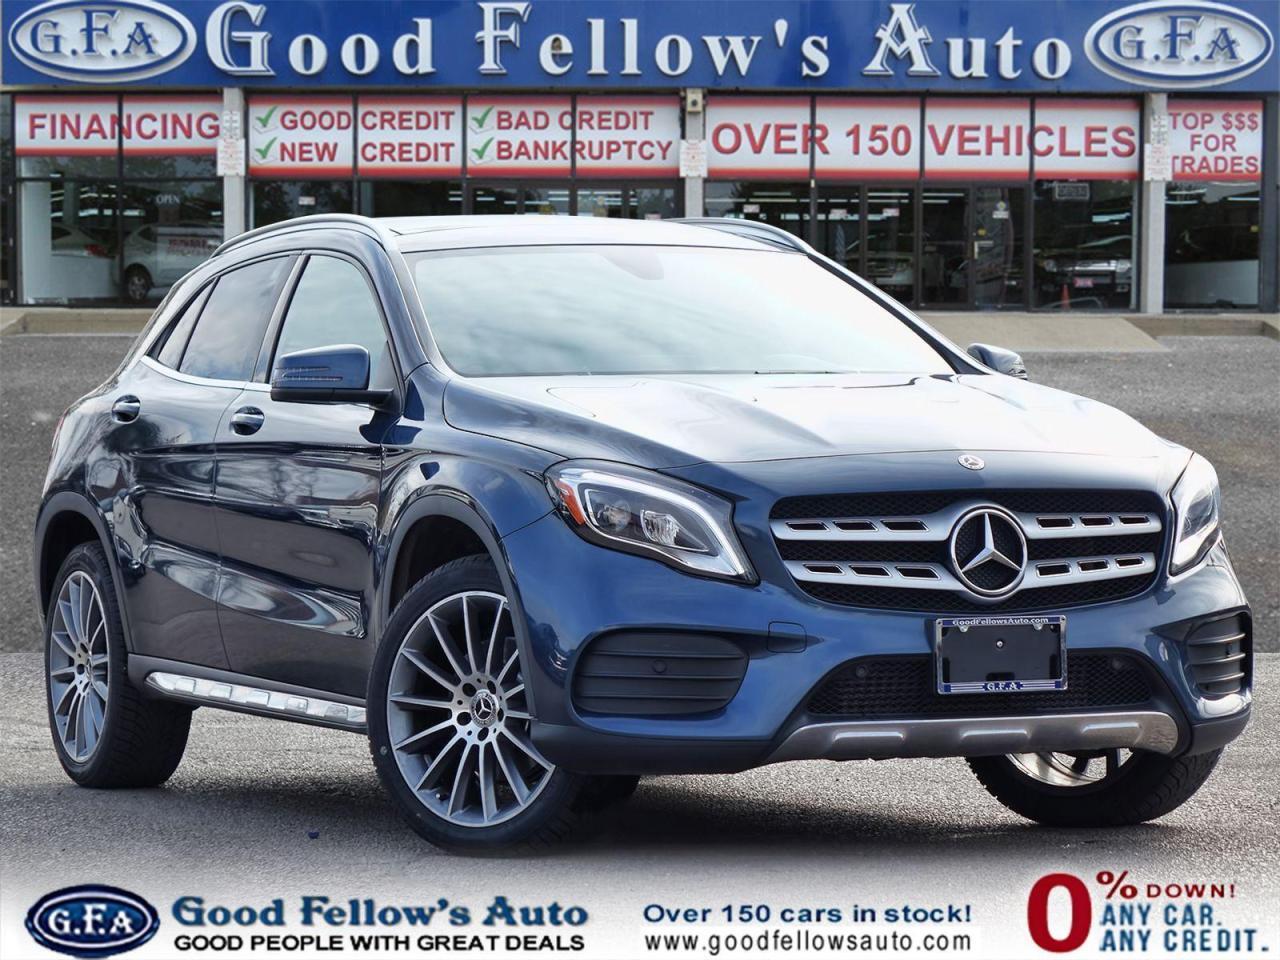 2019 Mercedes-Benz GLA 4MATIC, LEATHER SEATS, PANORAMIC ROOF, NAVIGATION,